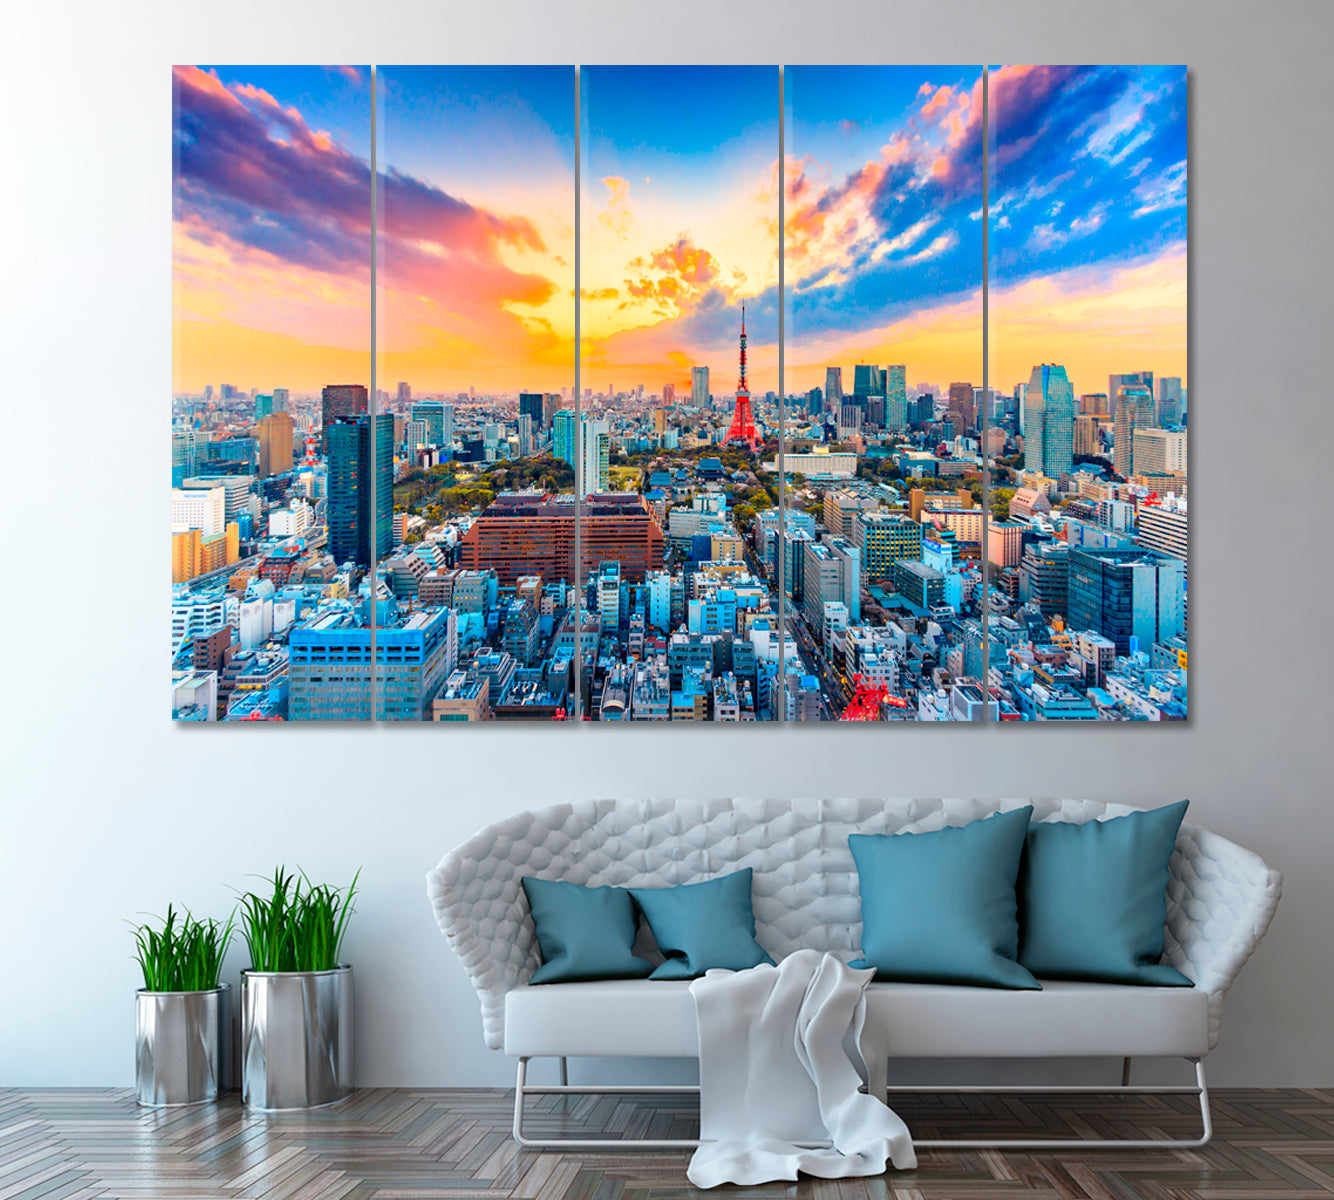 Tokyo Cityscapes Japan Canvas Print ArtLexy 5 Panels 36"x24" inches 